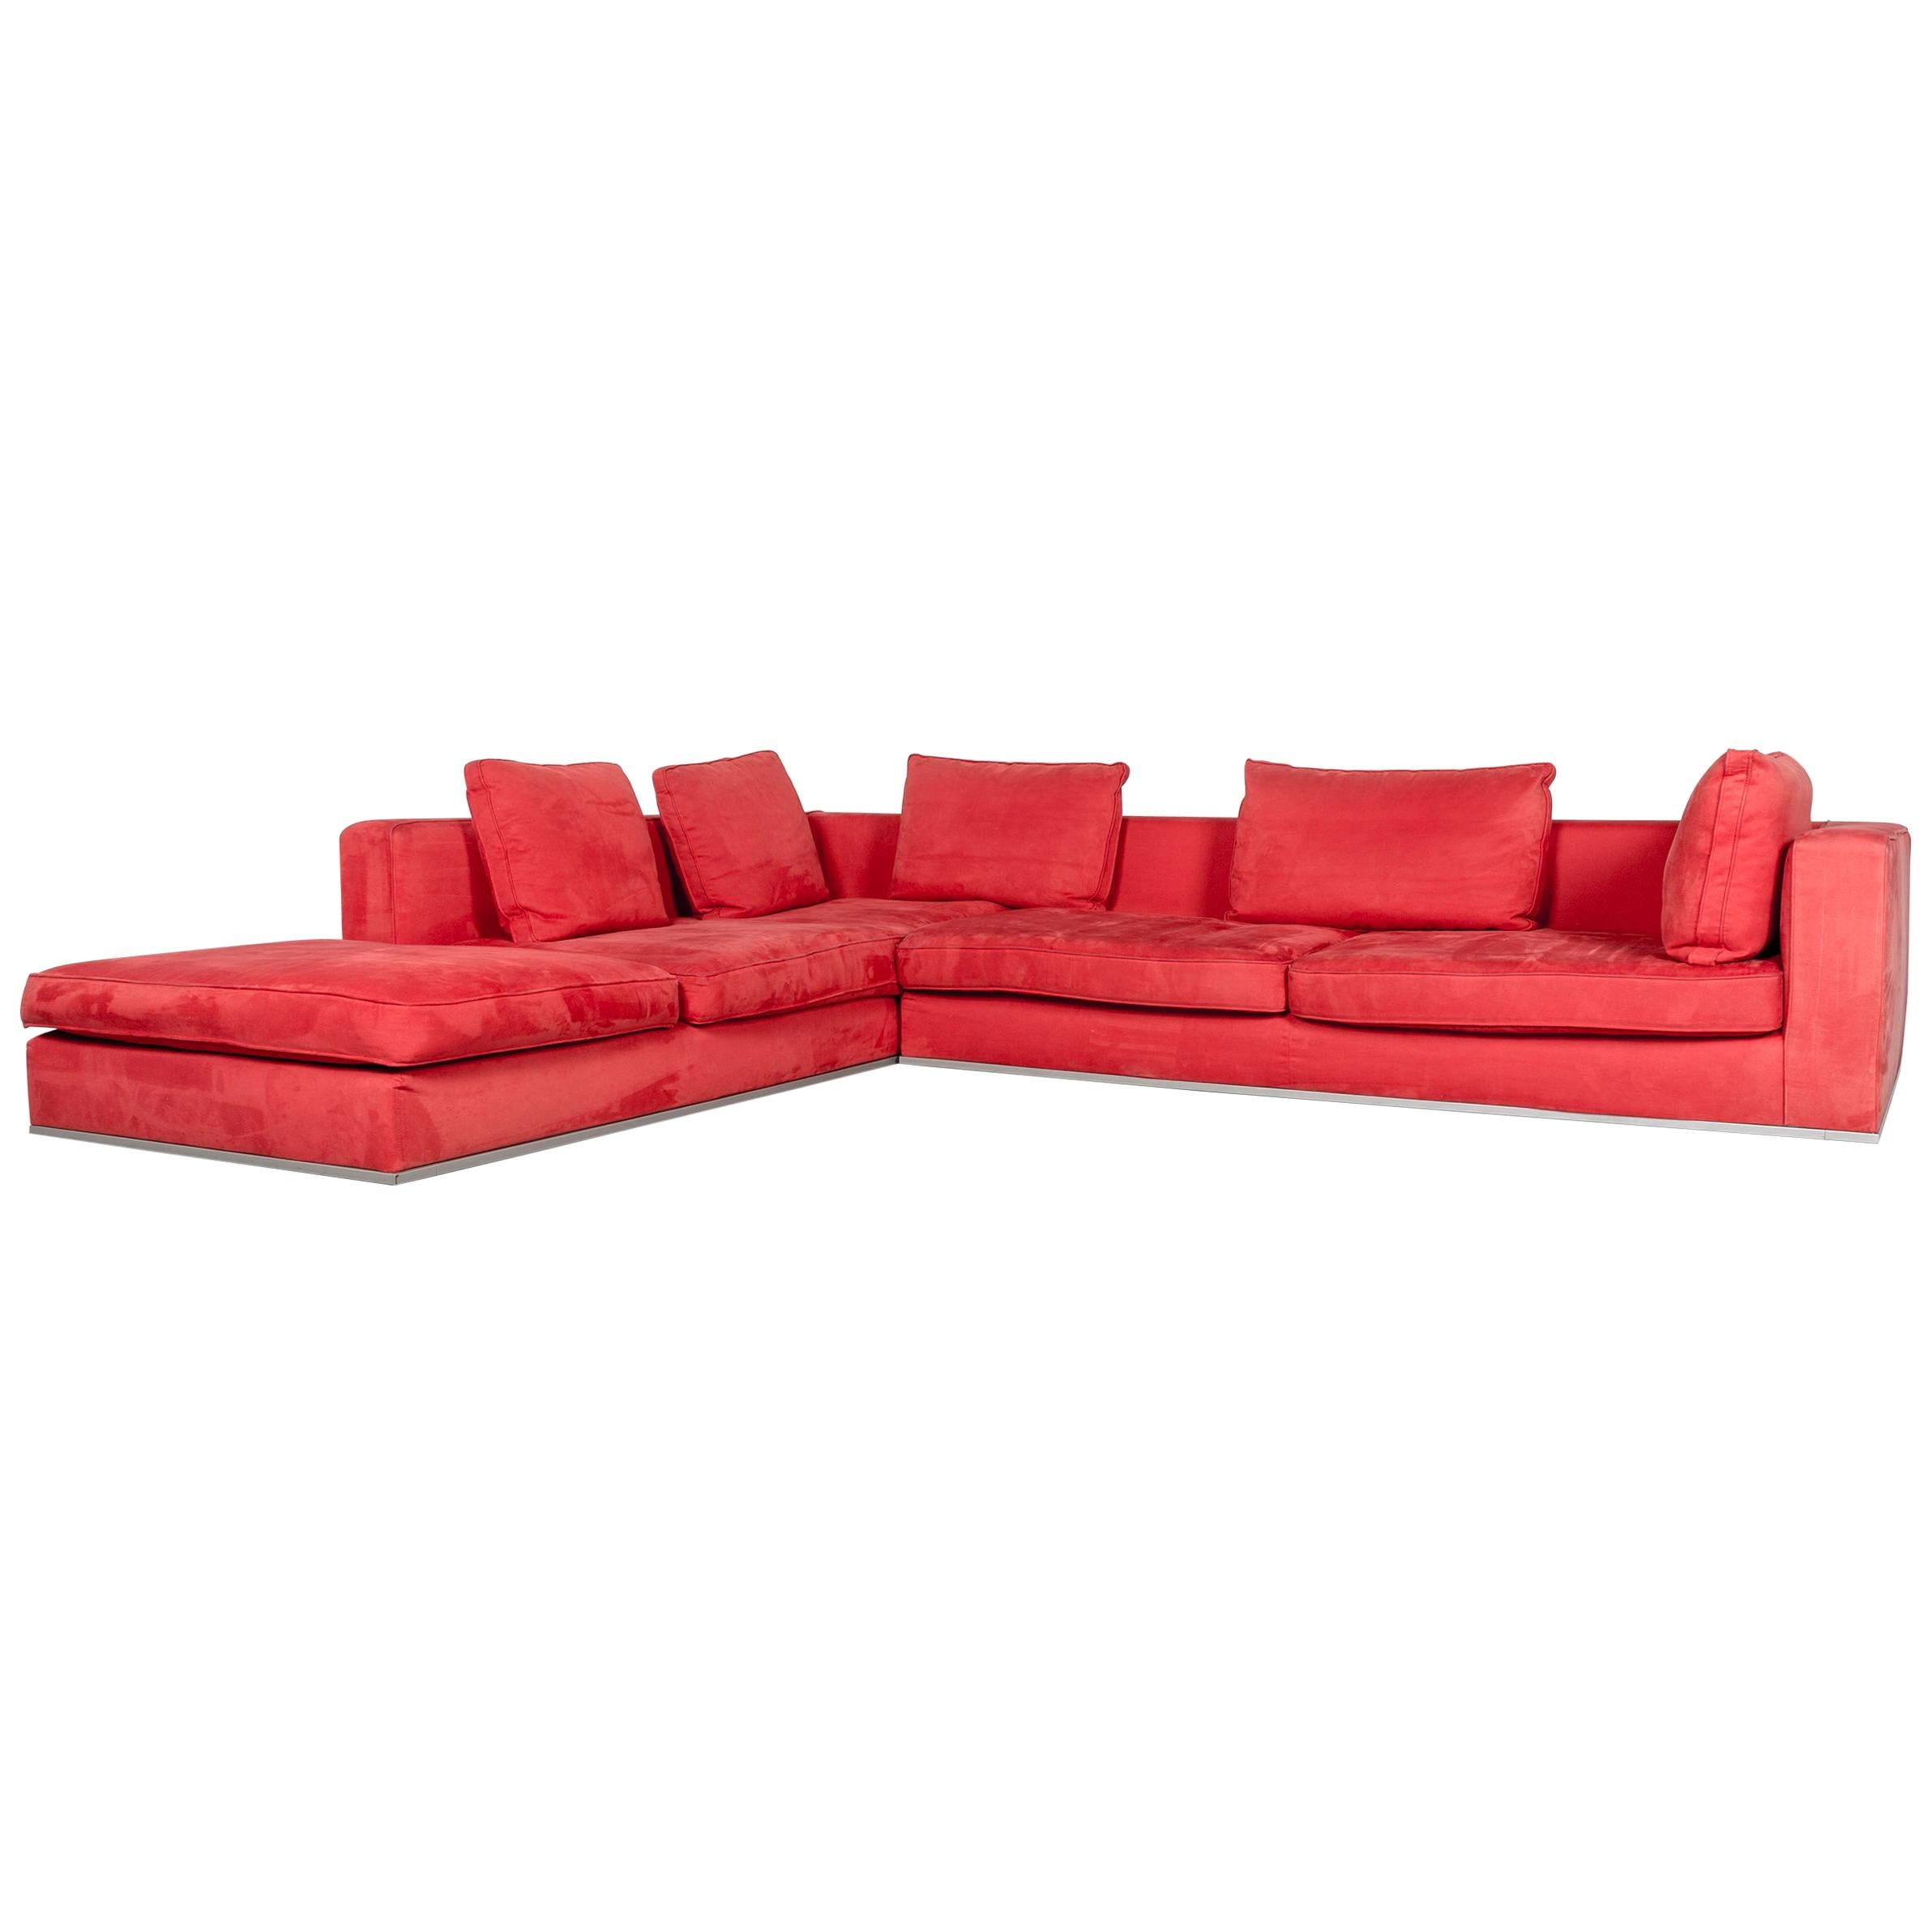 Who's Perfect Fabric Corner-Sofa Red Couch For Sale